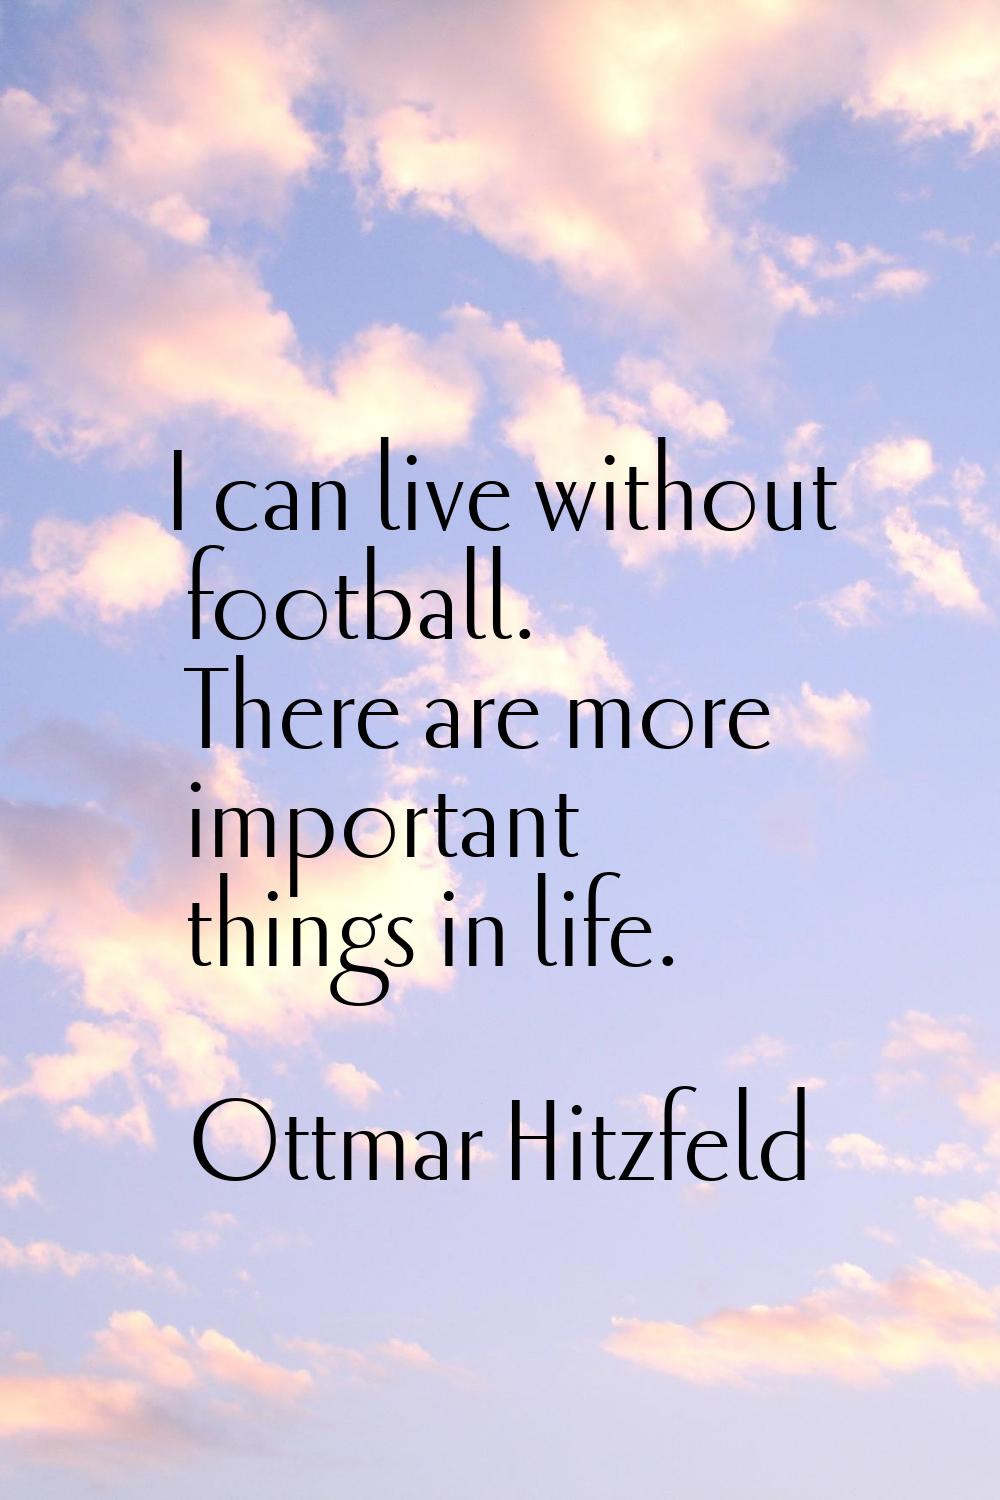 I can live without football. There are more important things in life.